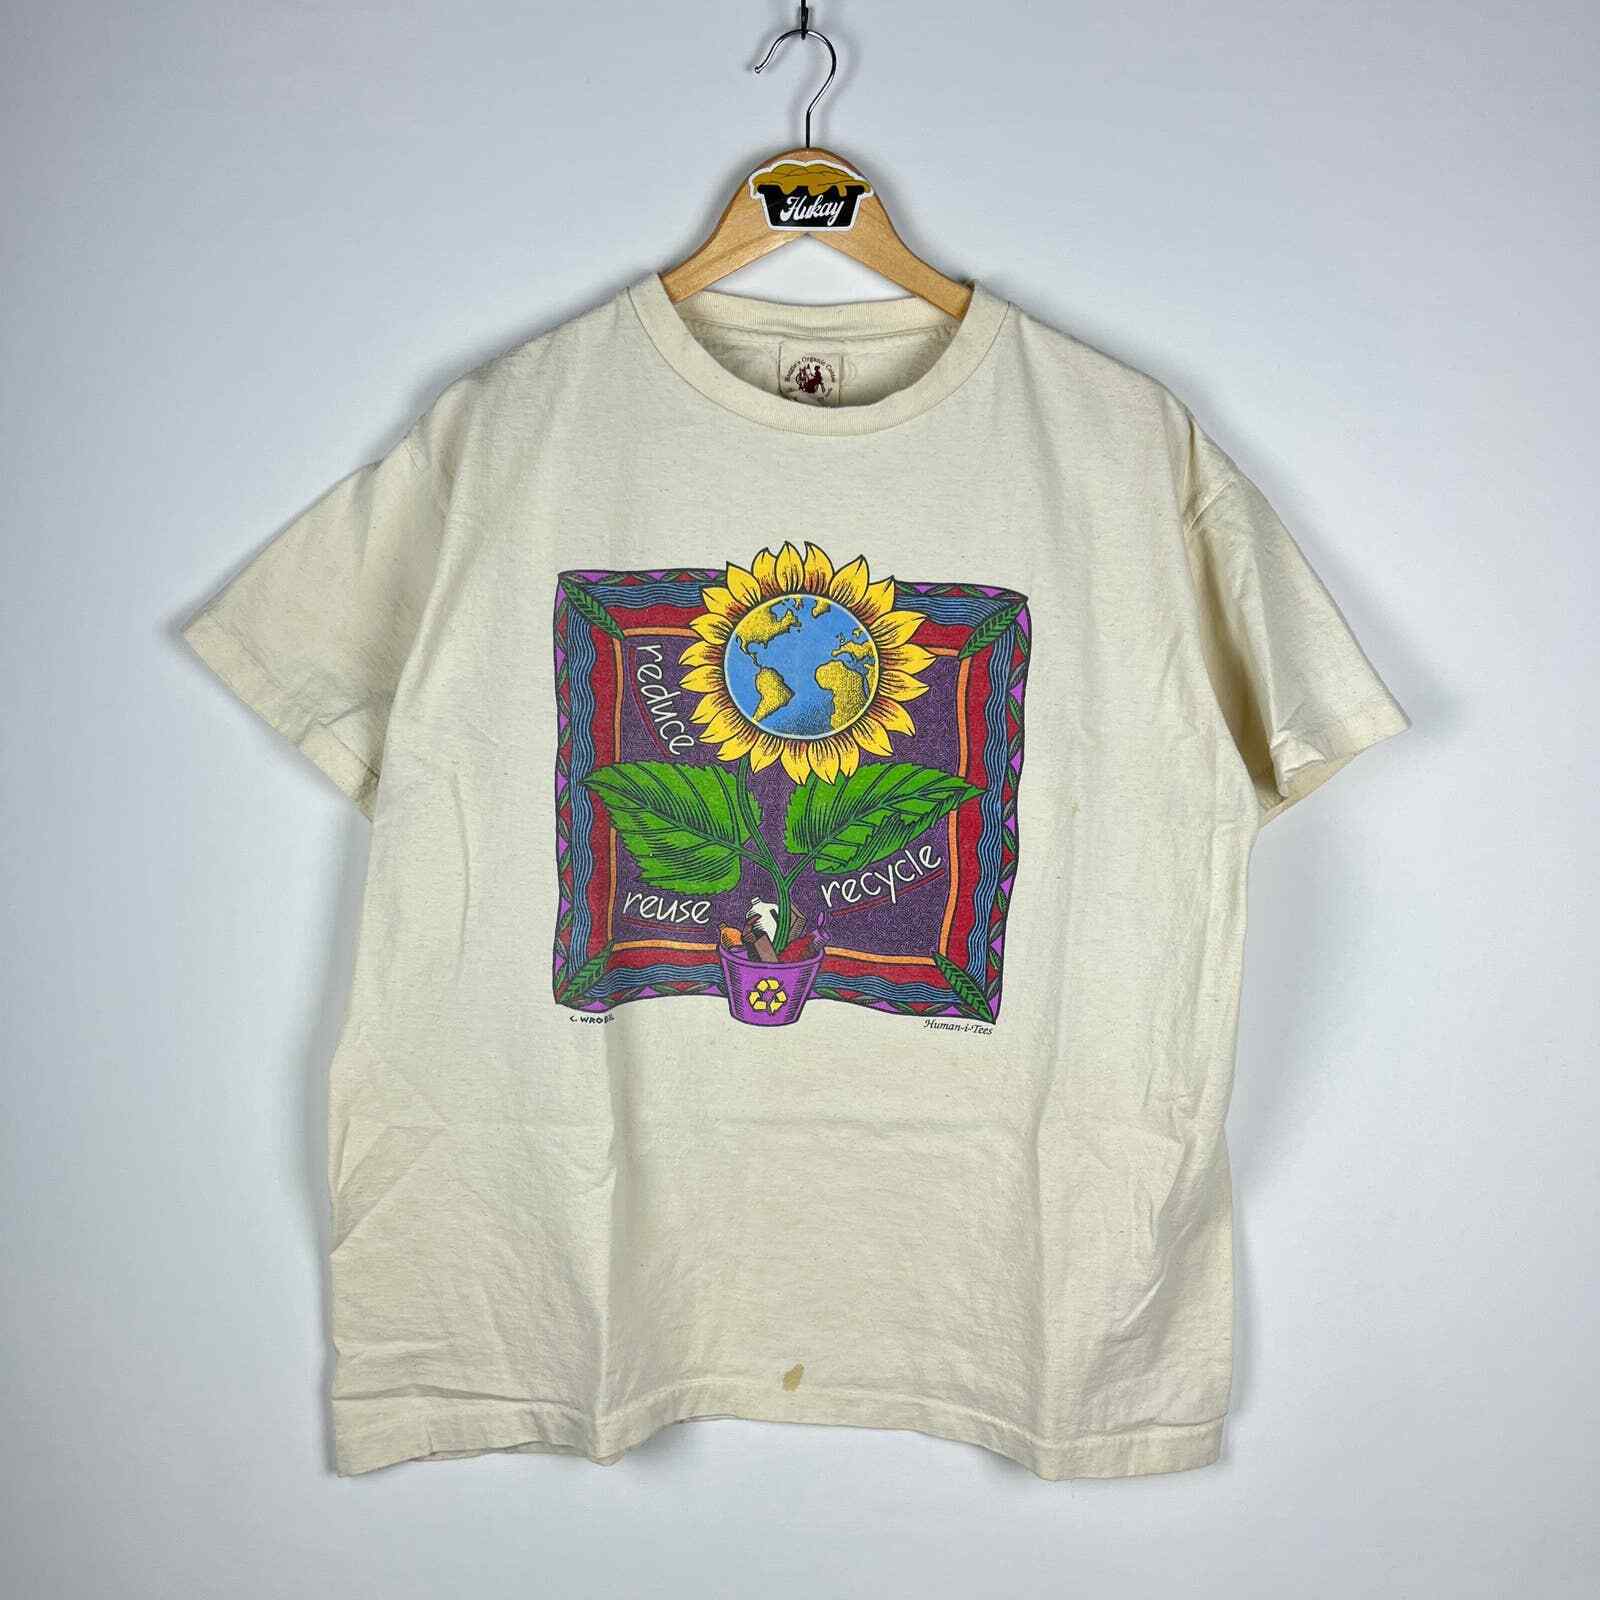 Vintage 90s Sunflower Earth Day Style T Shirt XL